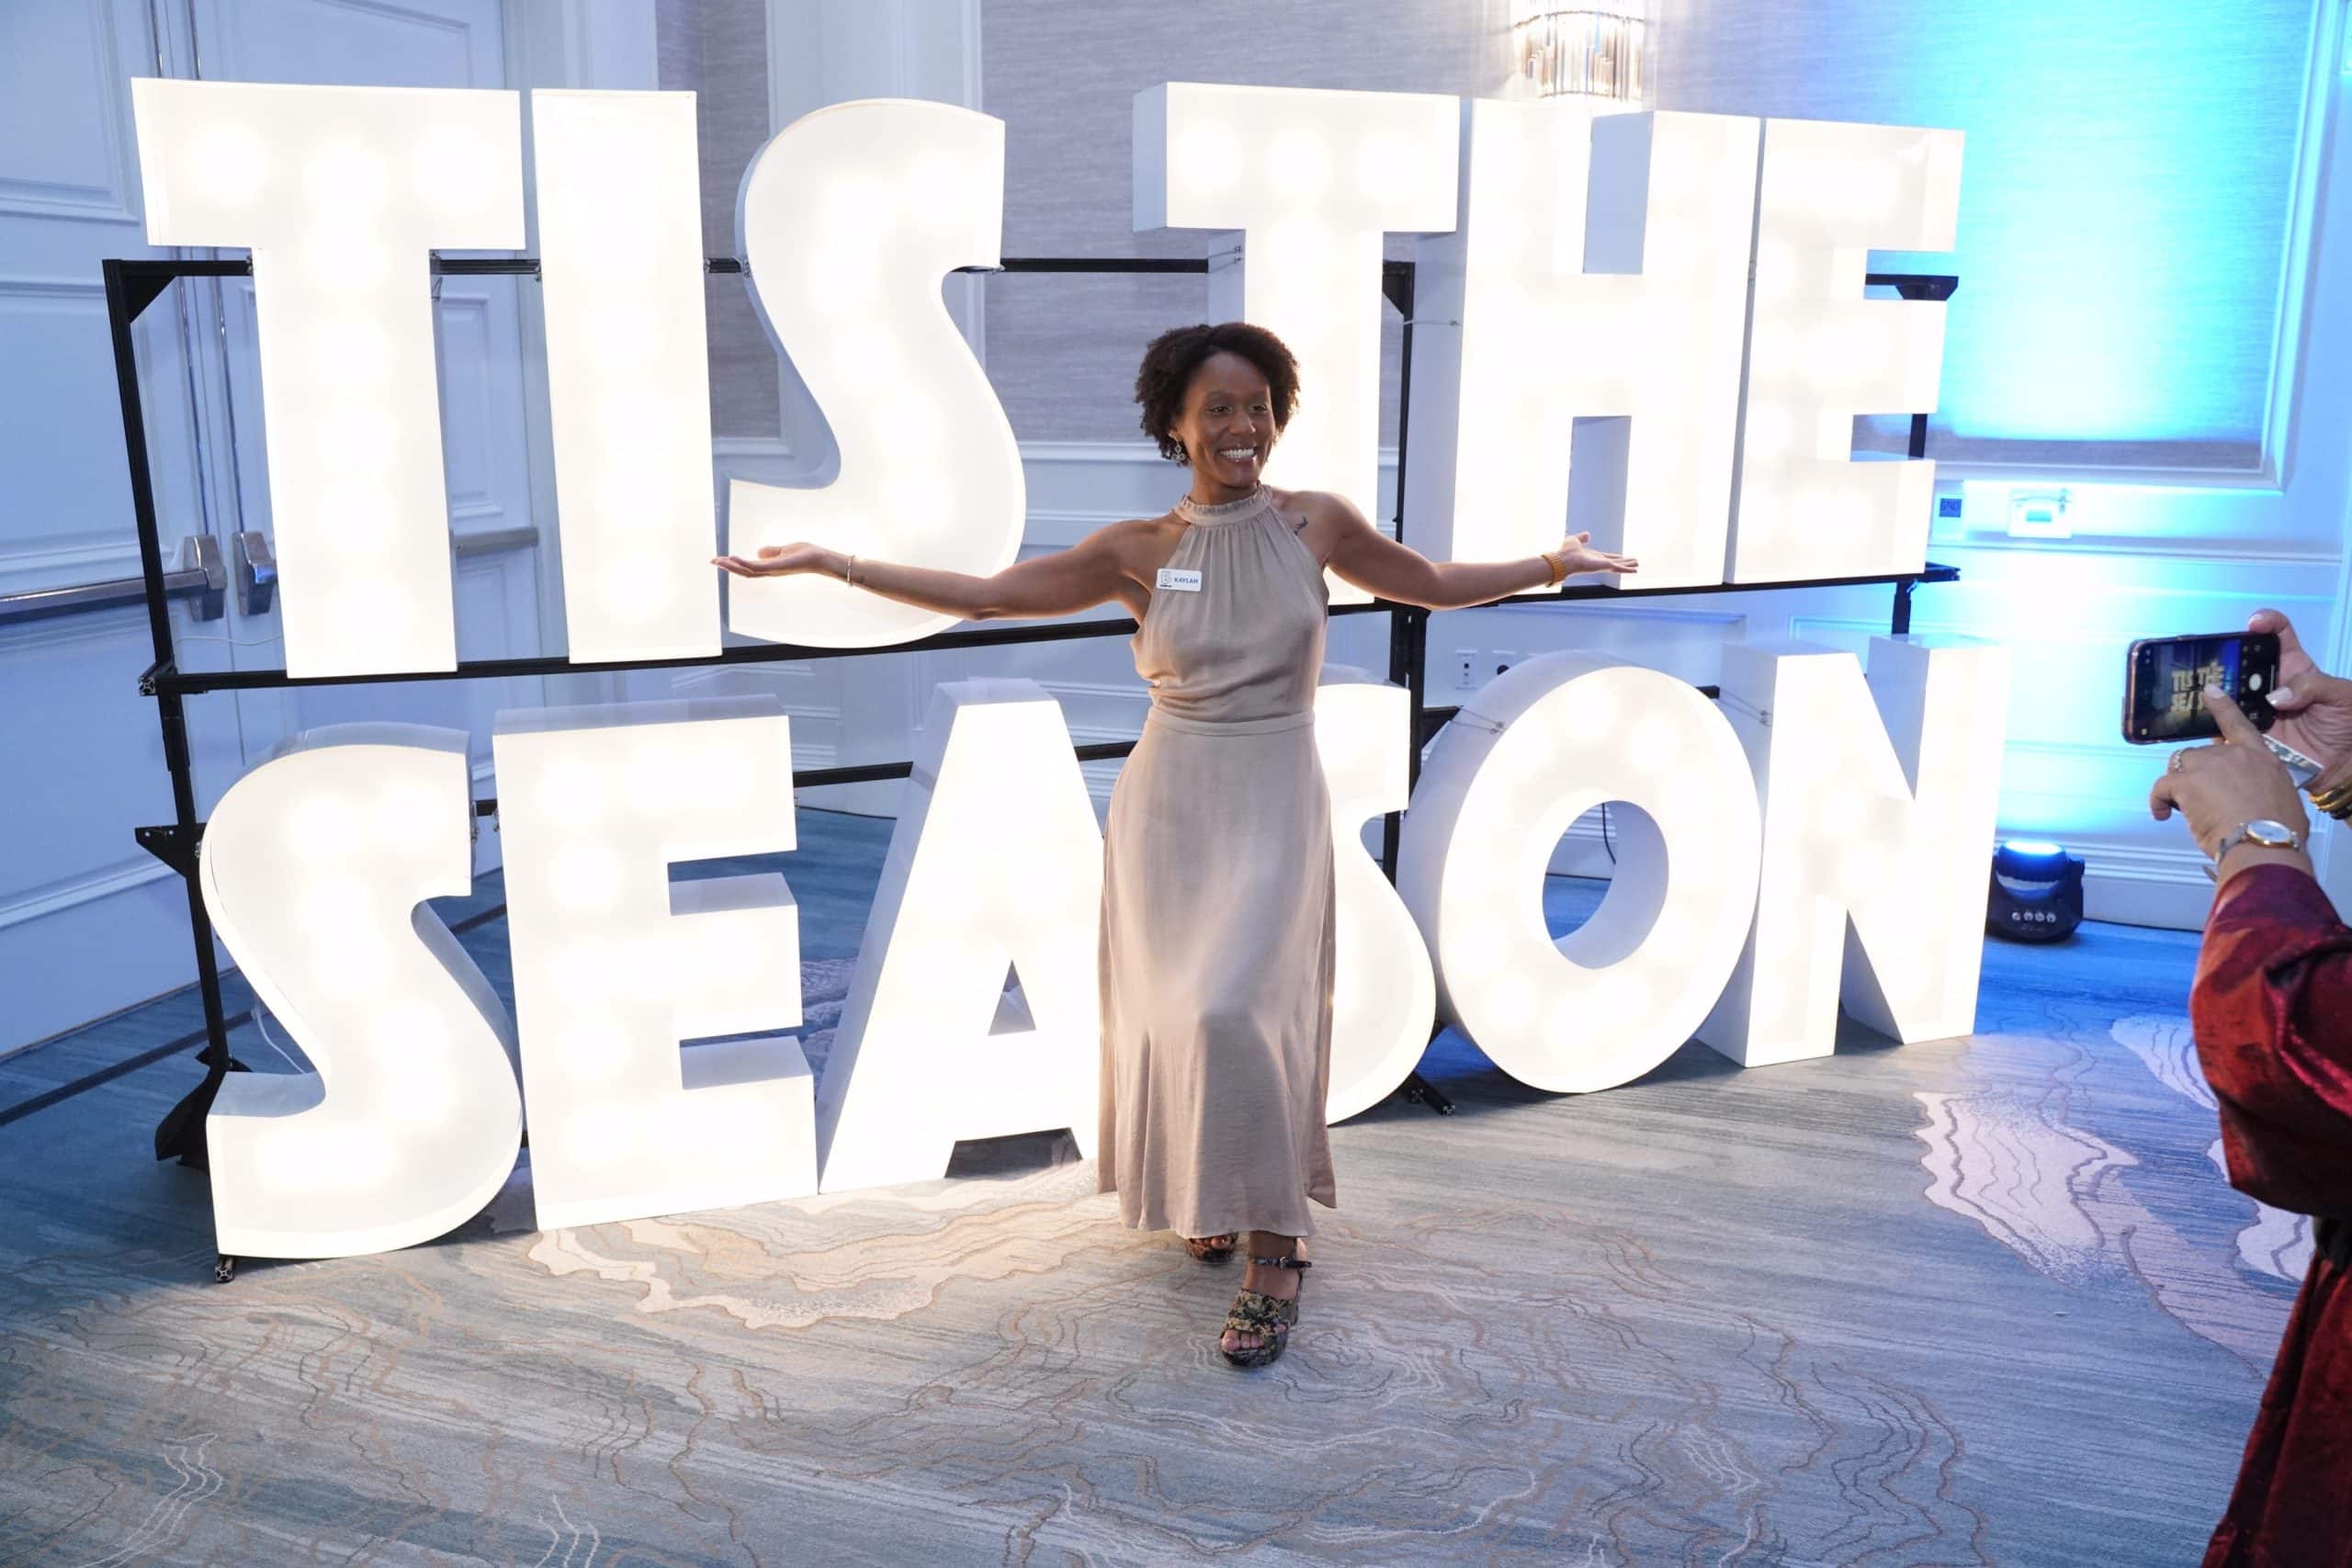 Event-Lit business owner in front of a two-tier marquee letter display that reads "TIS THE SEASON"